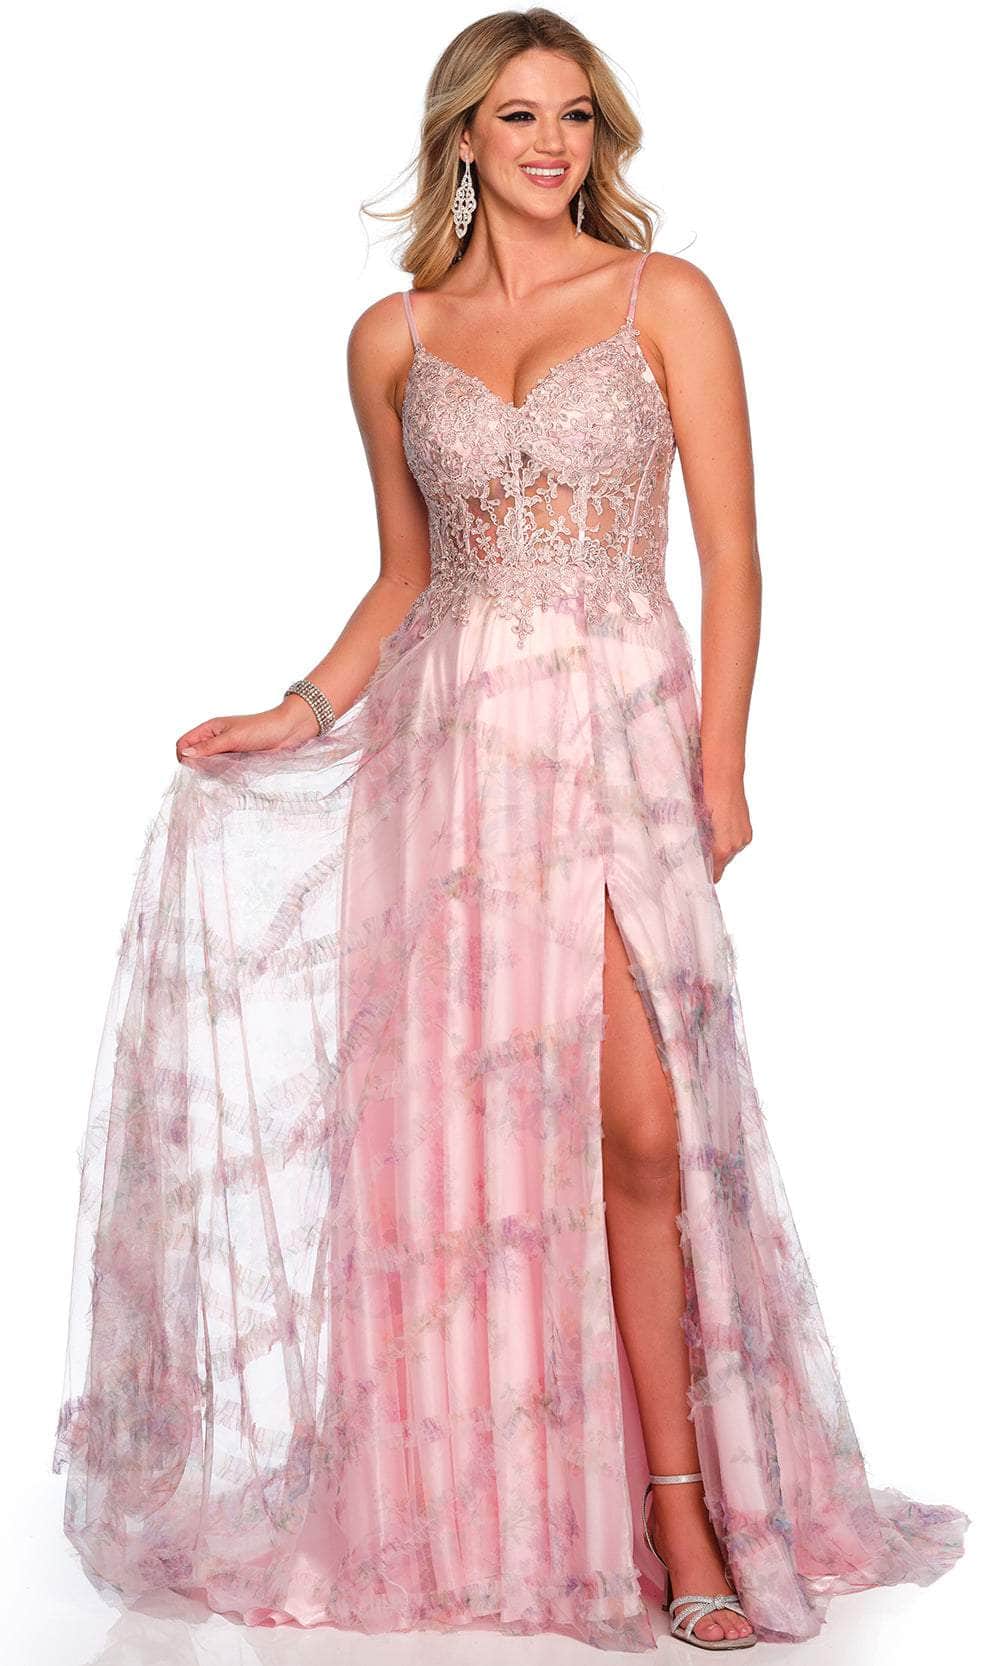 Dave & Johnny 11428 - Lace Applique Sleeveless Prom Gown
